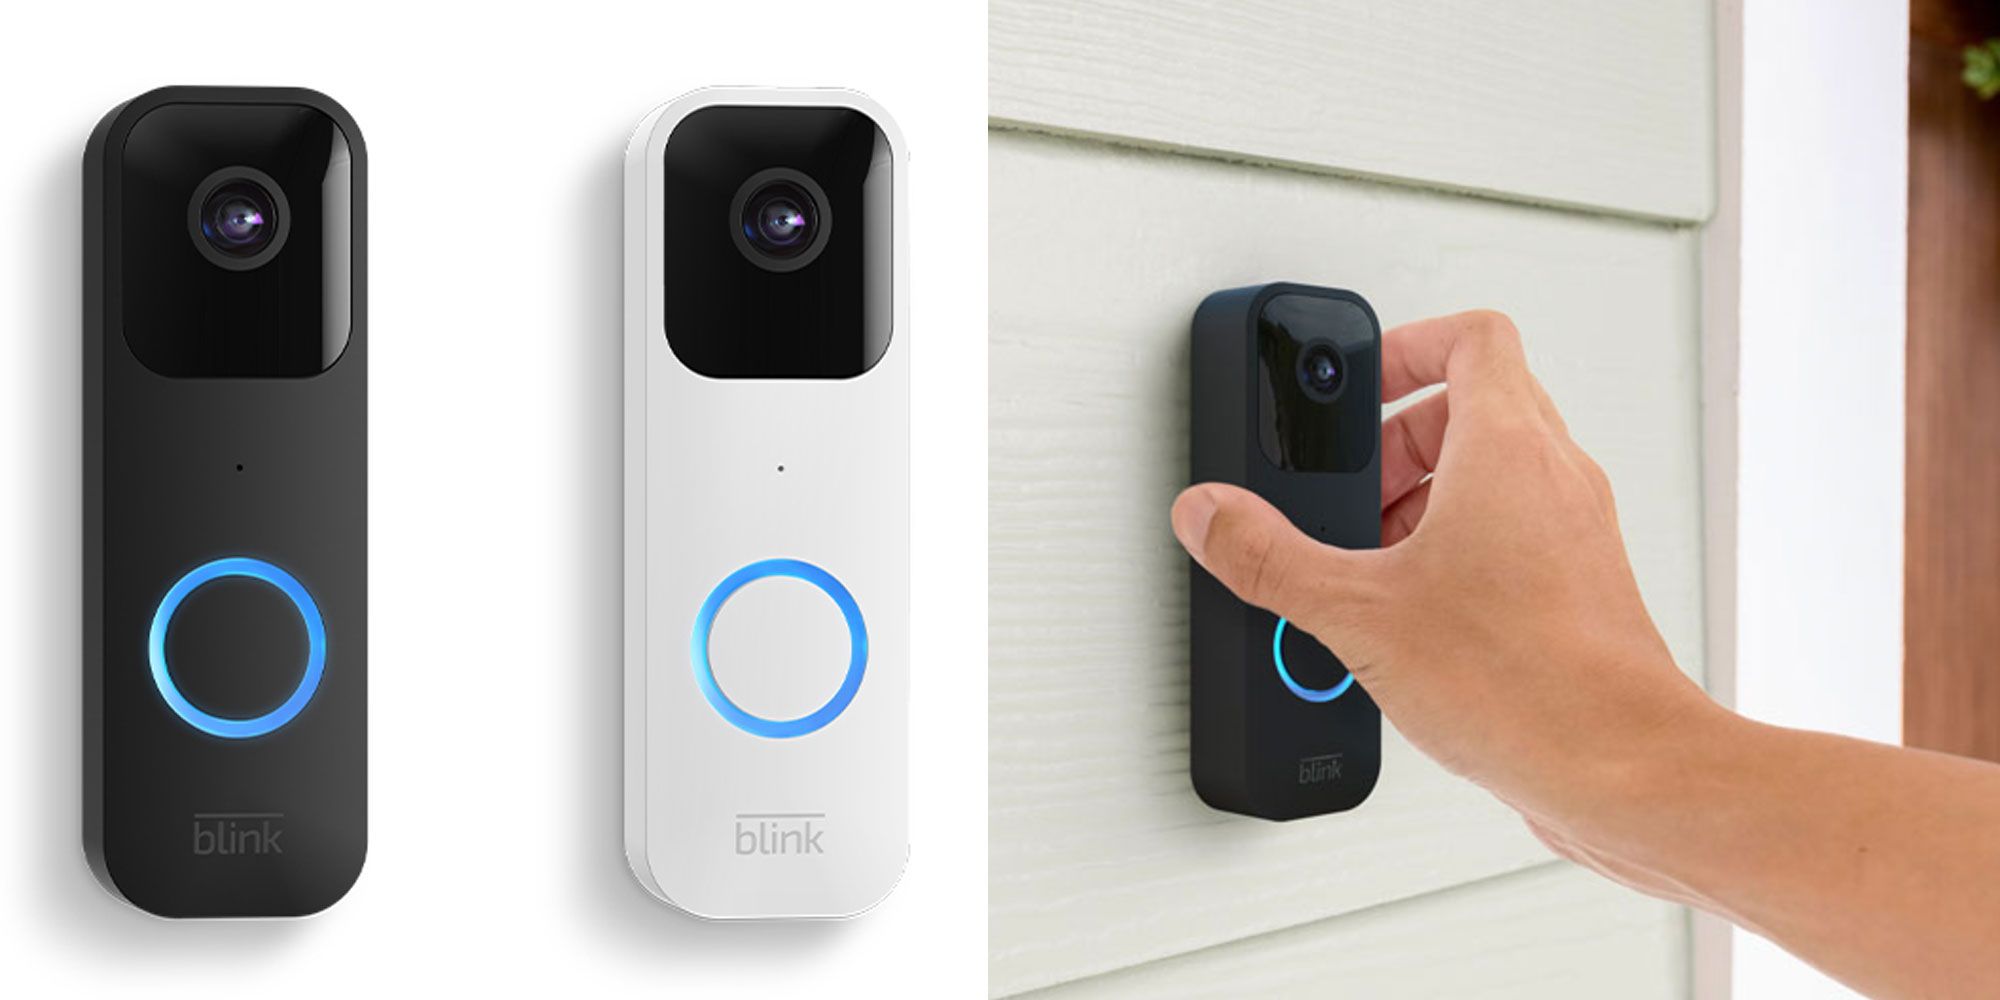 Product images of the Blink Video Doorbell.